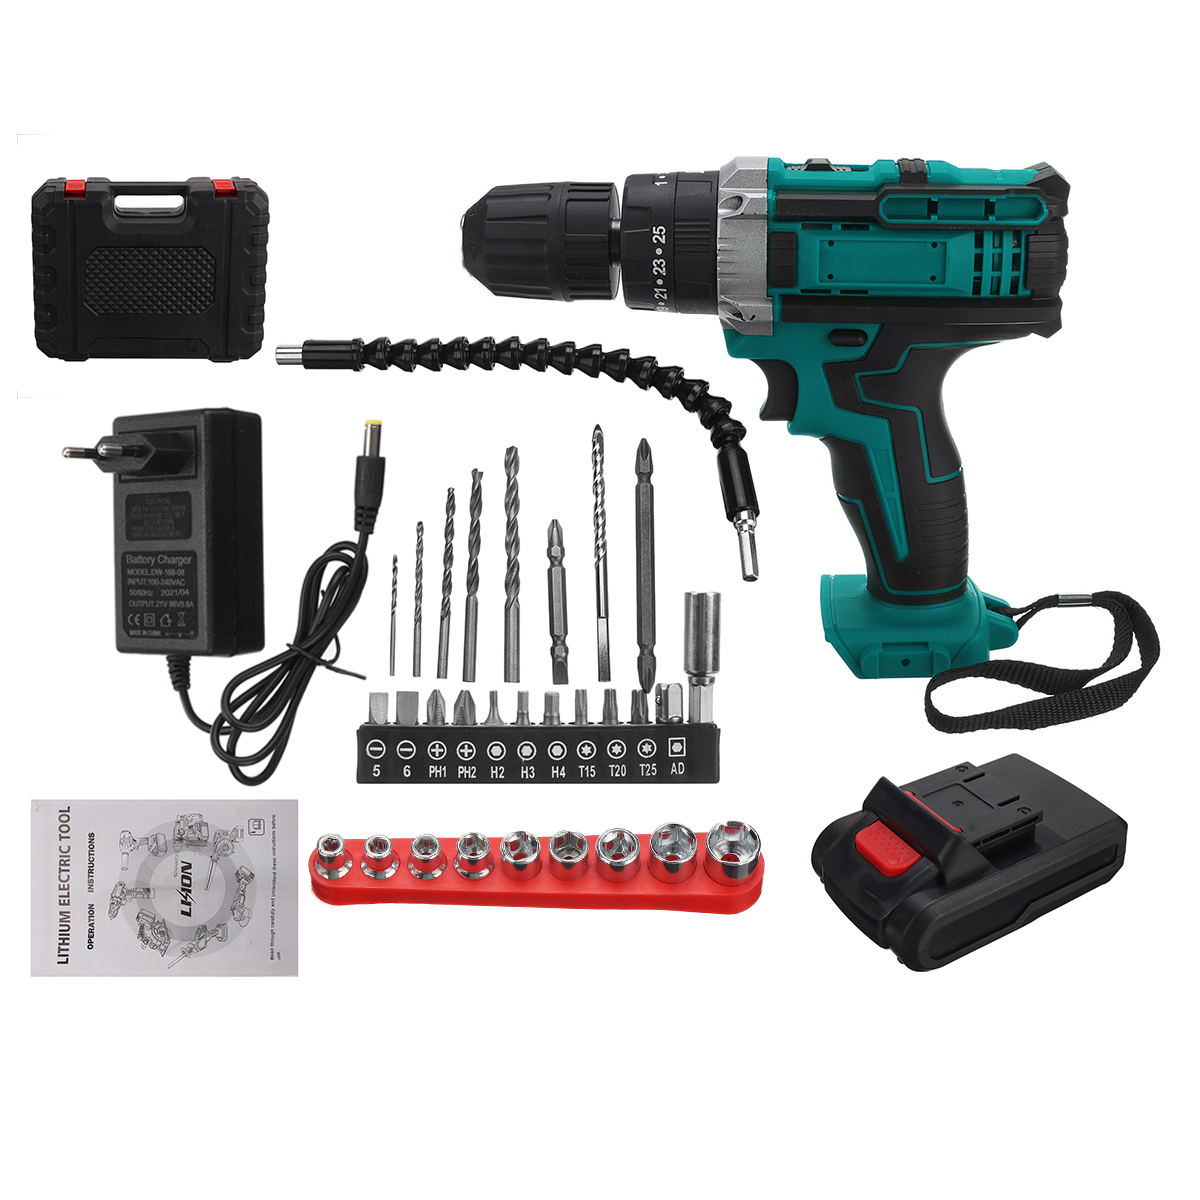 Cordless-Rechargeable-Electric-Drill-Screwdriver-LED-Portable-Metal-Wood-Drilling-Tool-W-12pcs-Batte-1848724-10